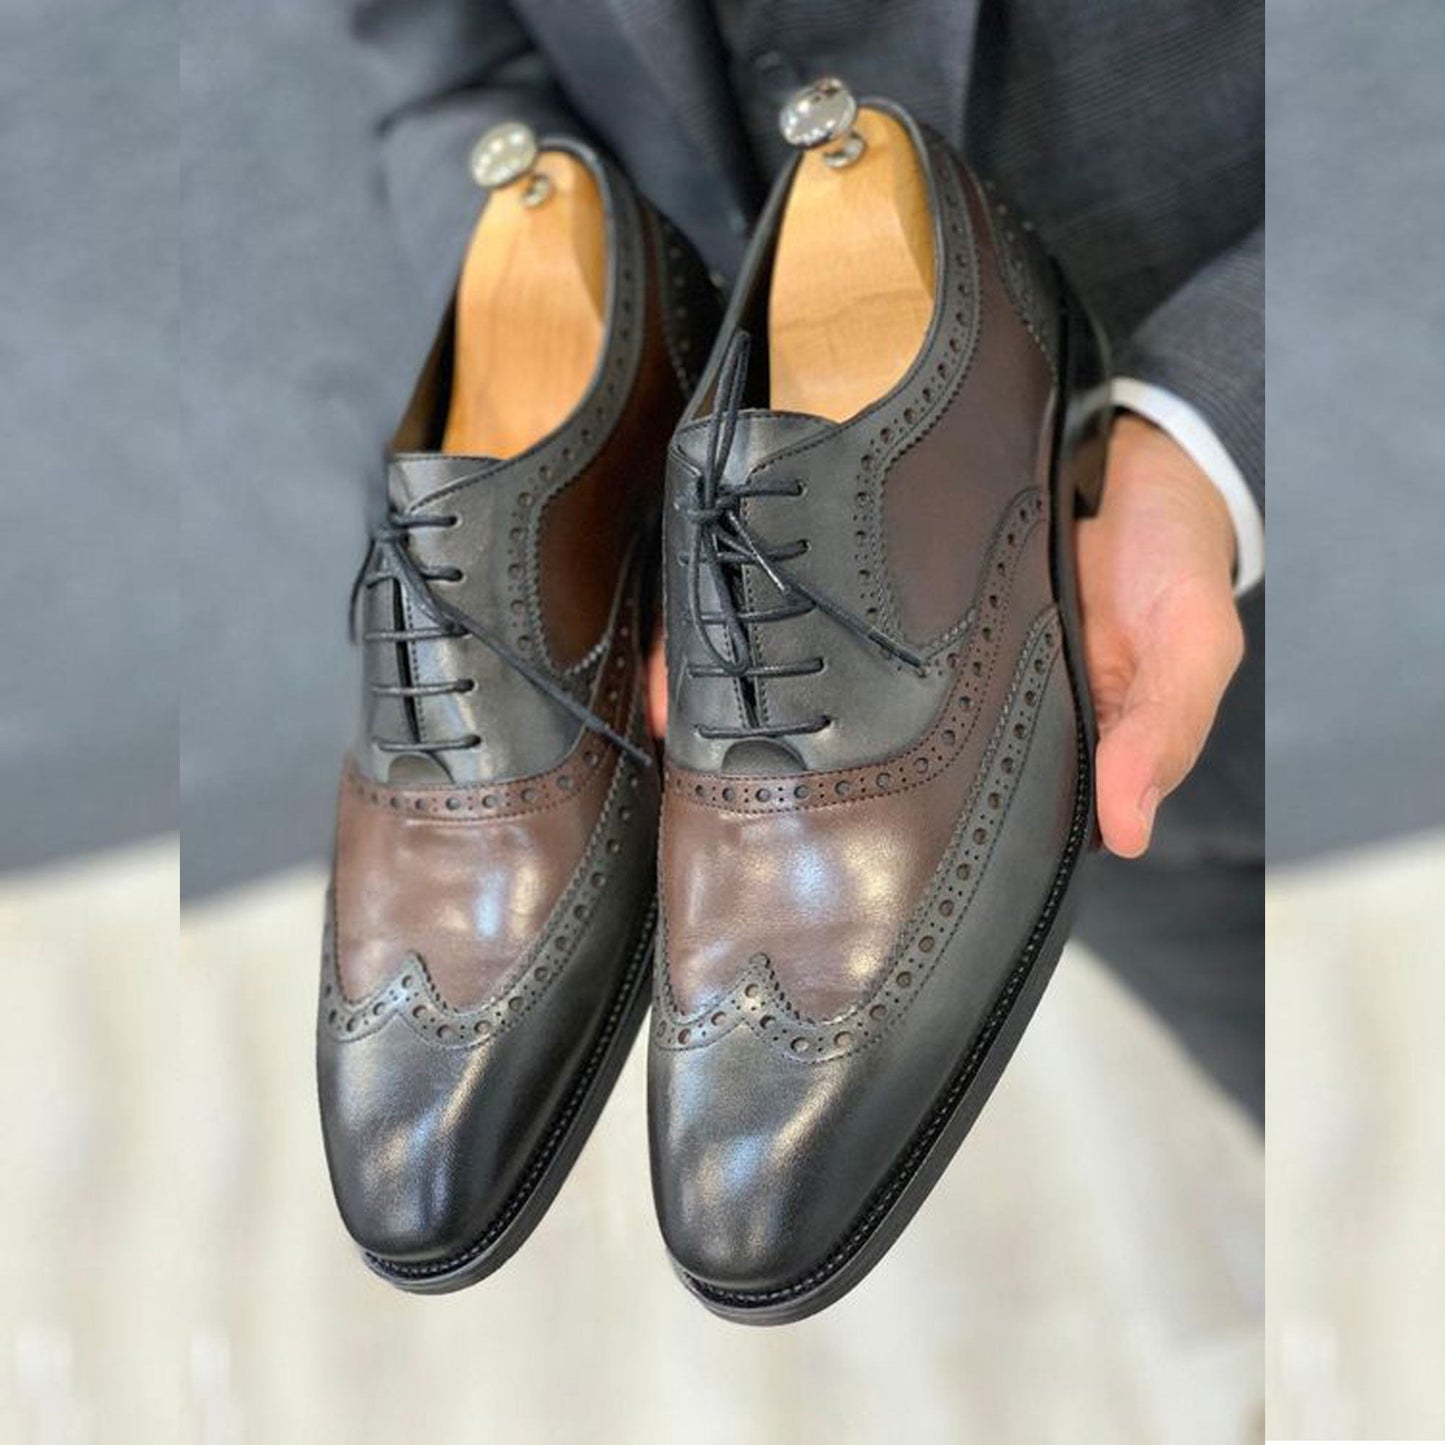 Tailor Made Handmade Bespoke Two Tone Genuine Leather Wingtip Oxford Men's Shoes